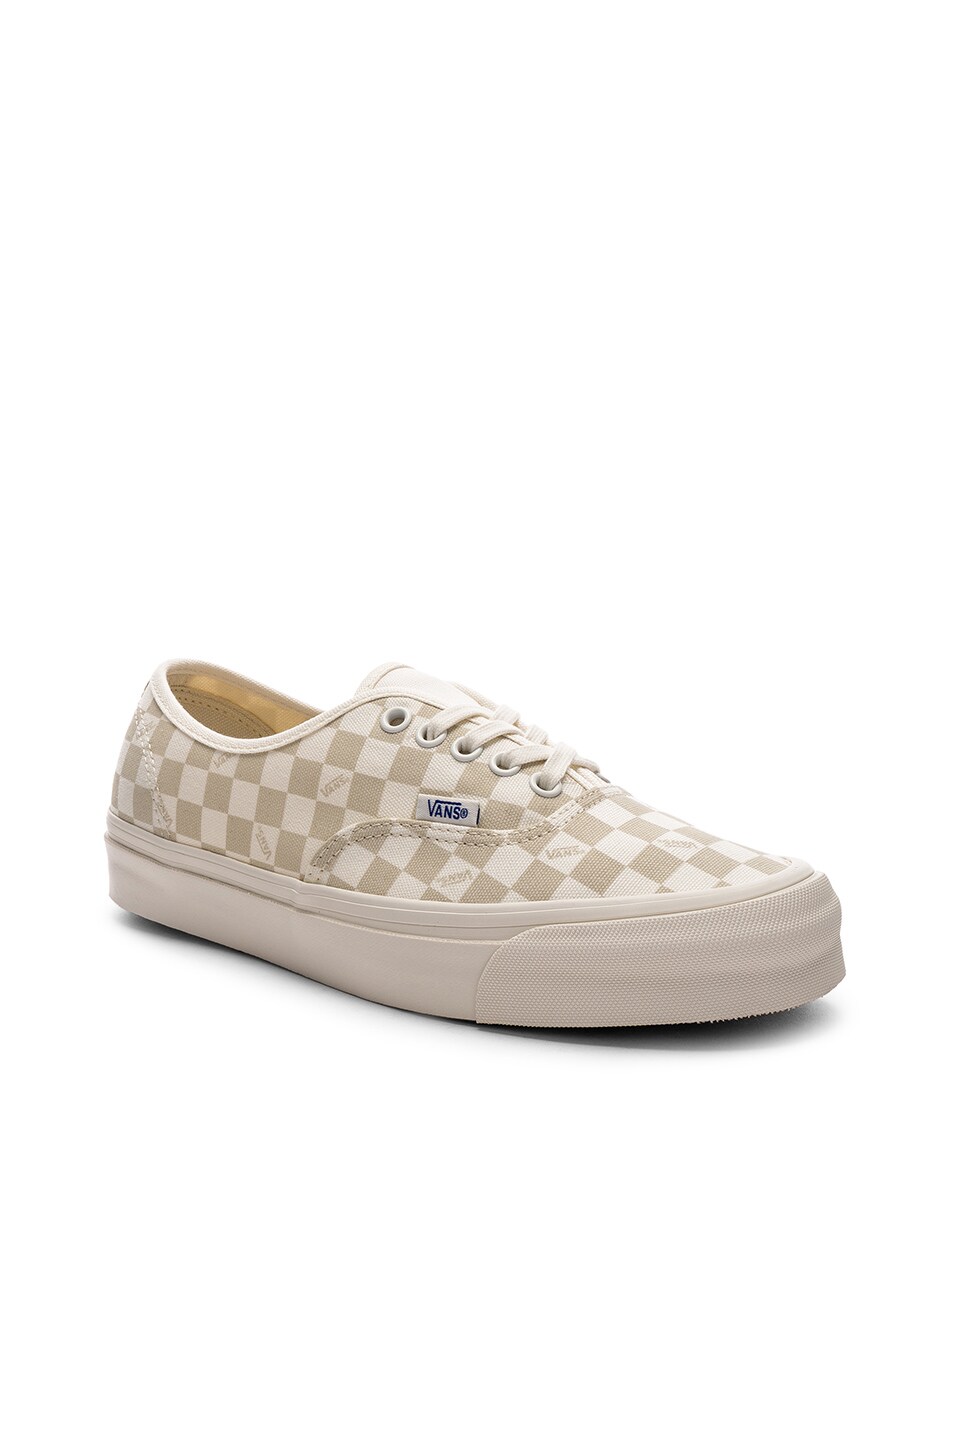 Image 1 of Vans Vault OG Authentic LX in Checkerboard & Marshmallow